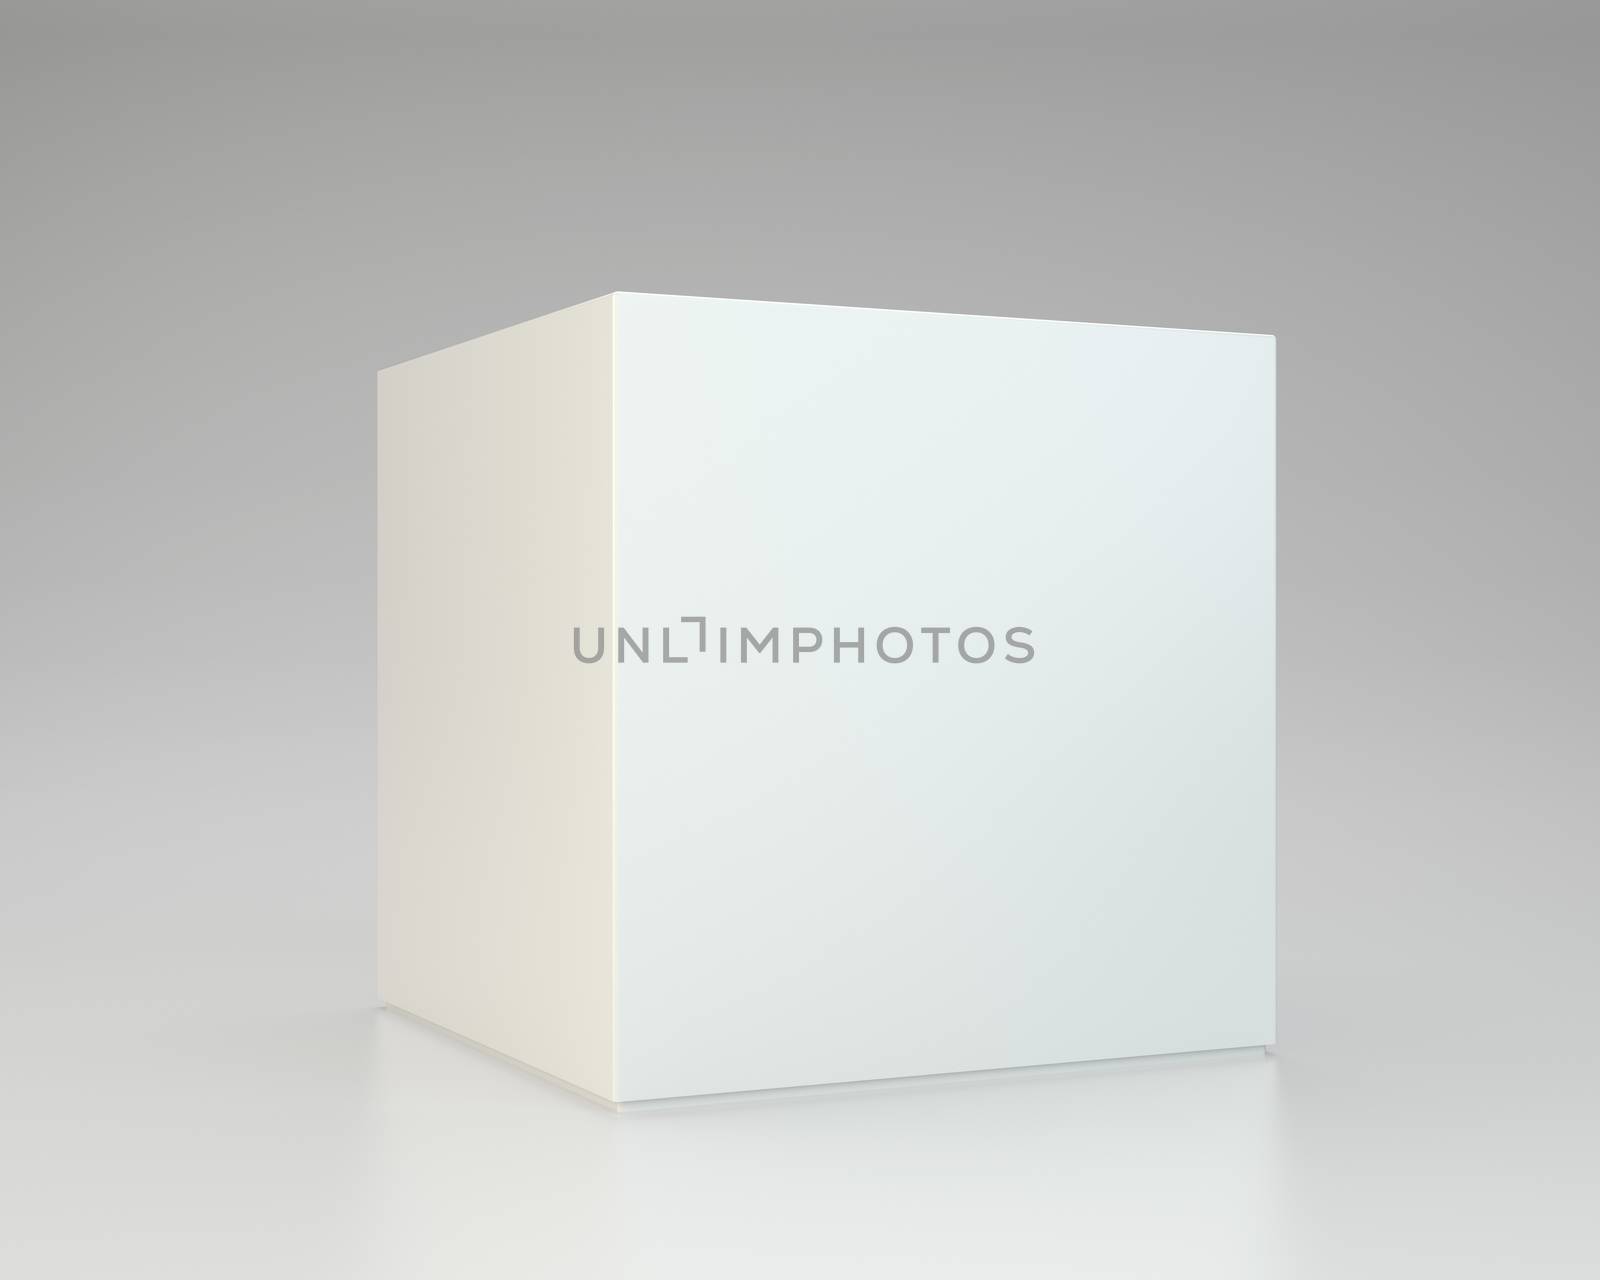 White package box on gray background by Mirexon